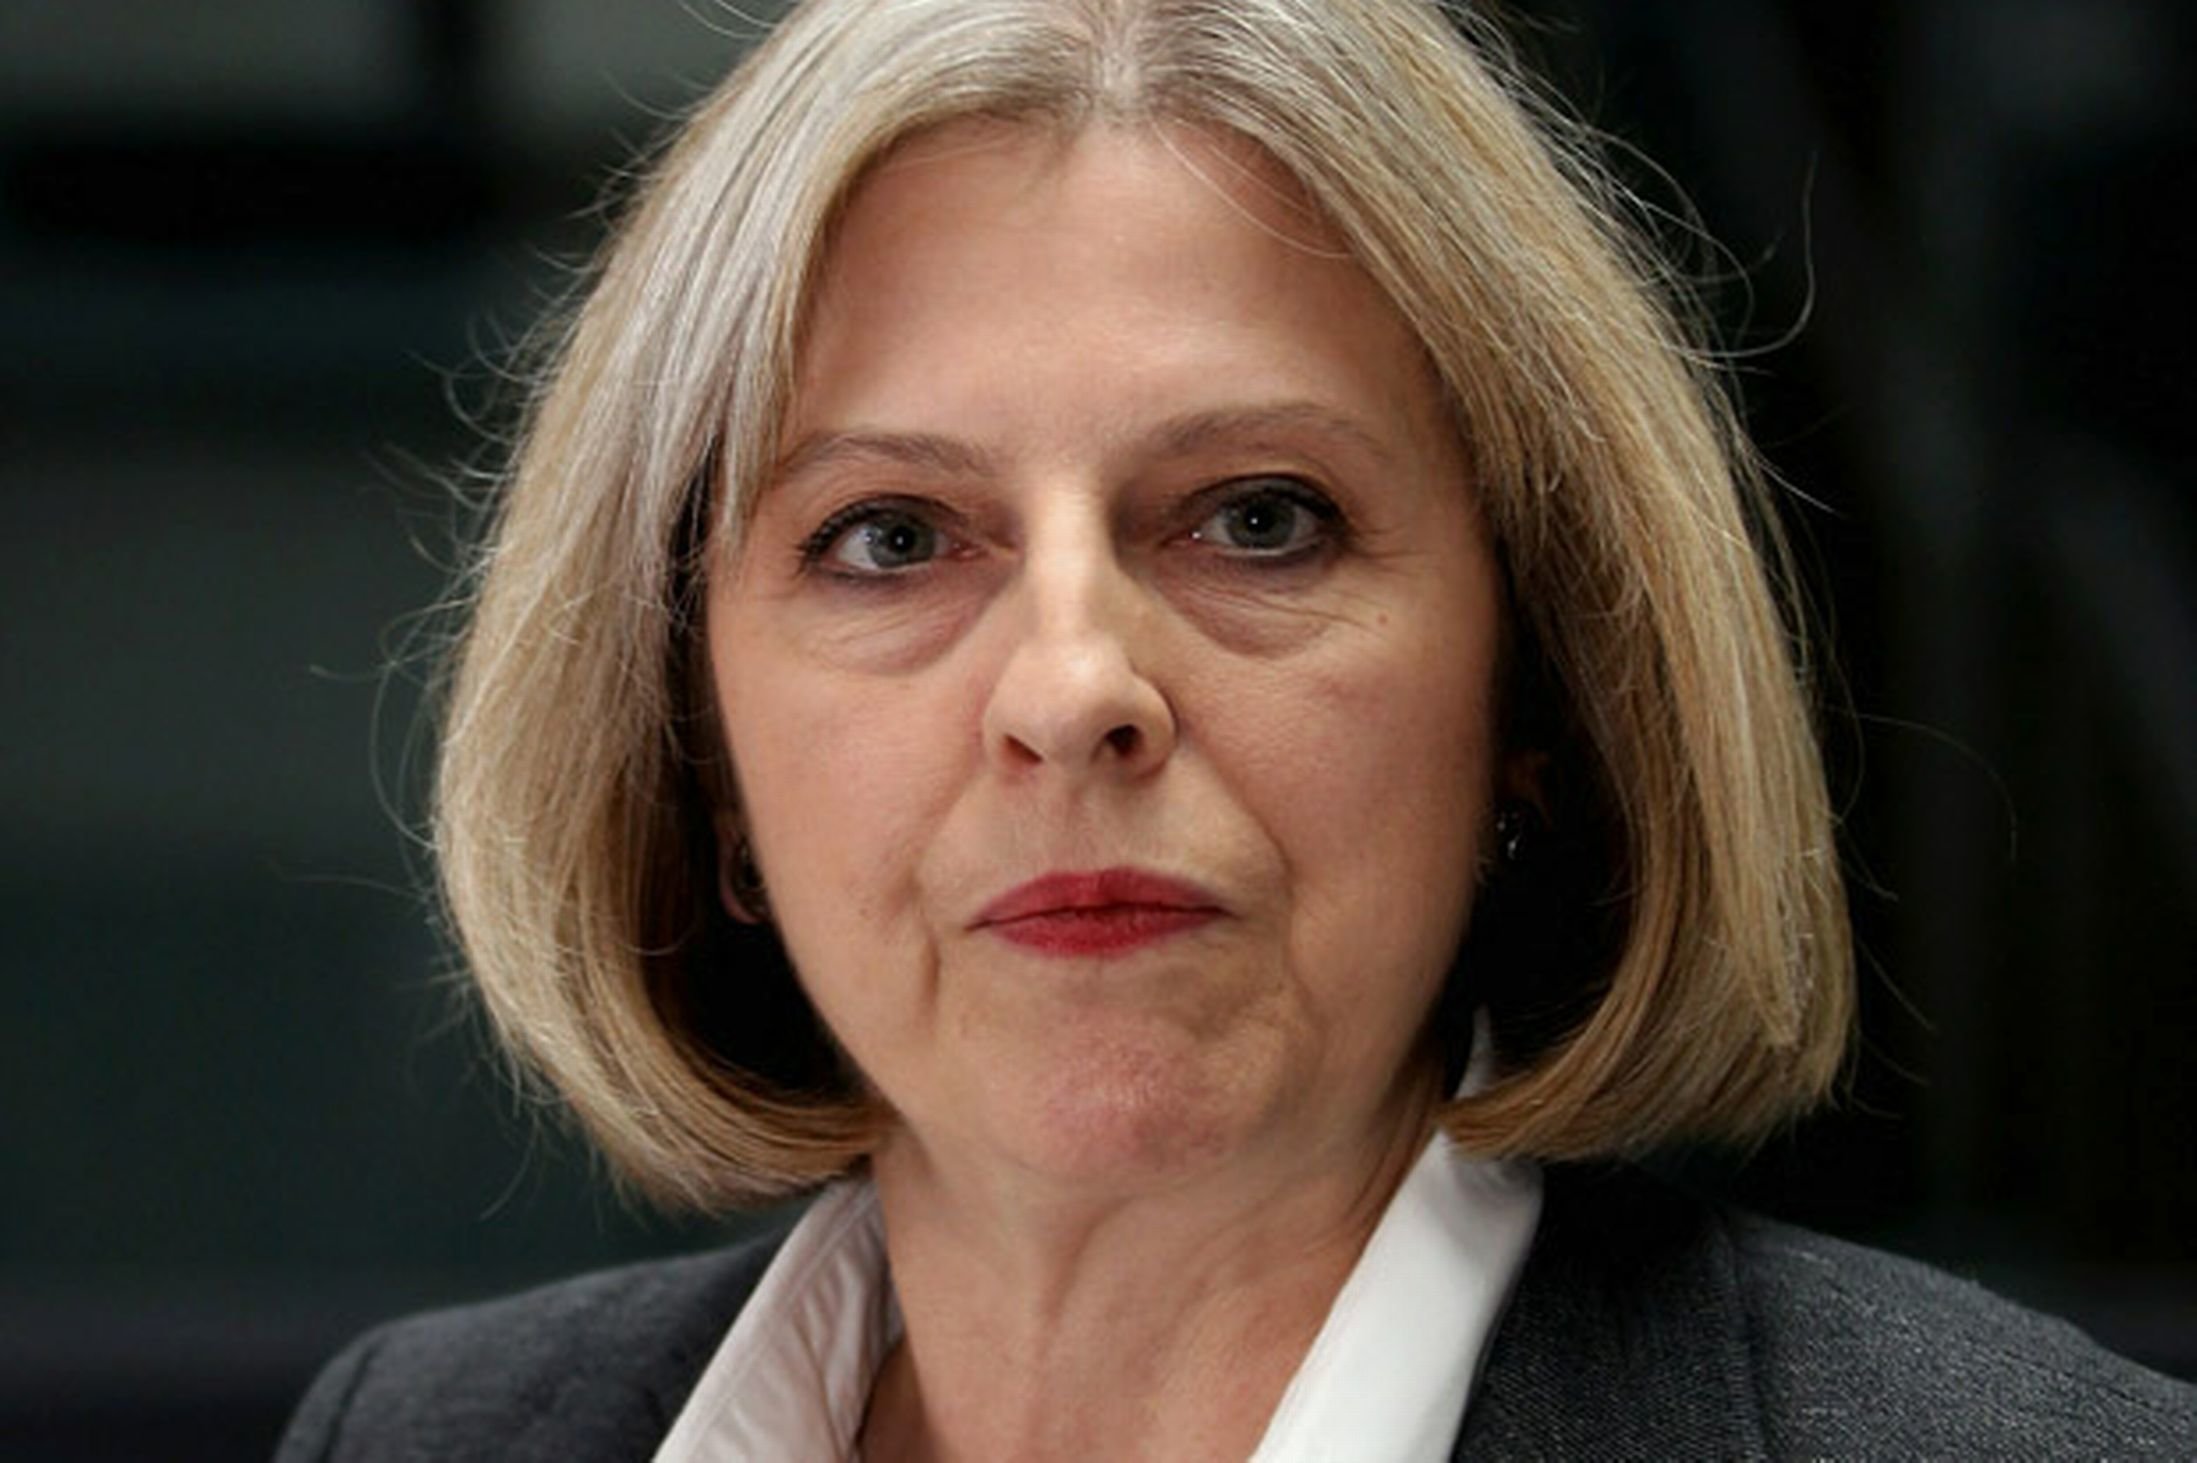 theresa-may-the-new-face-of-islamophobia-puppet-masters-sott